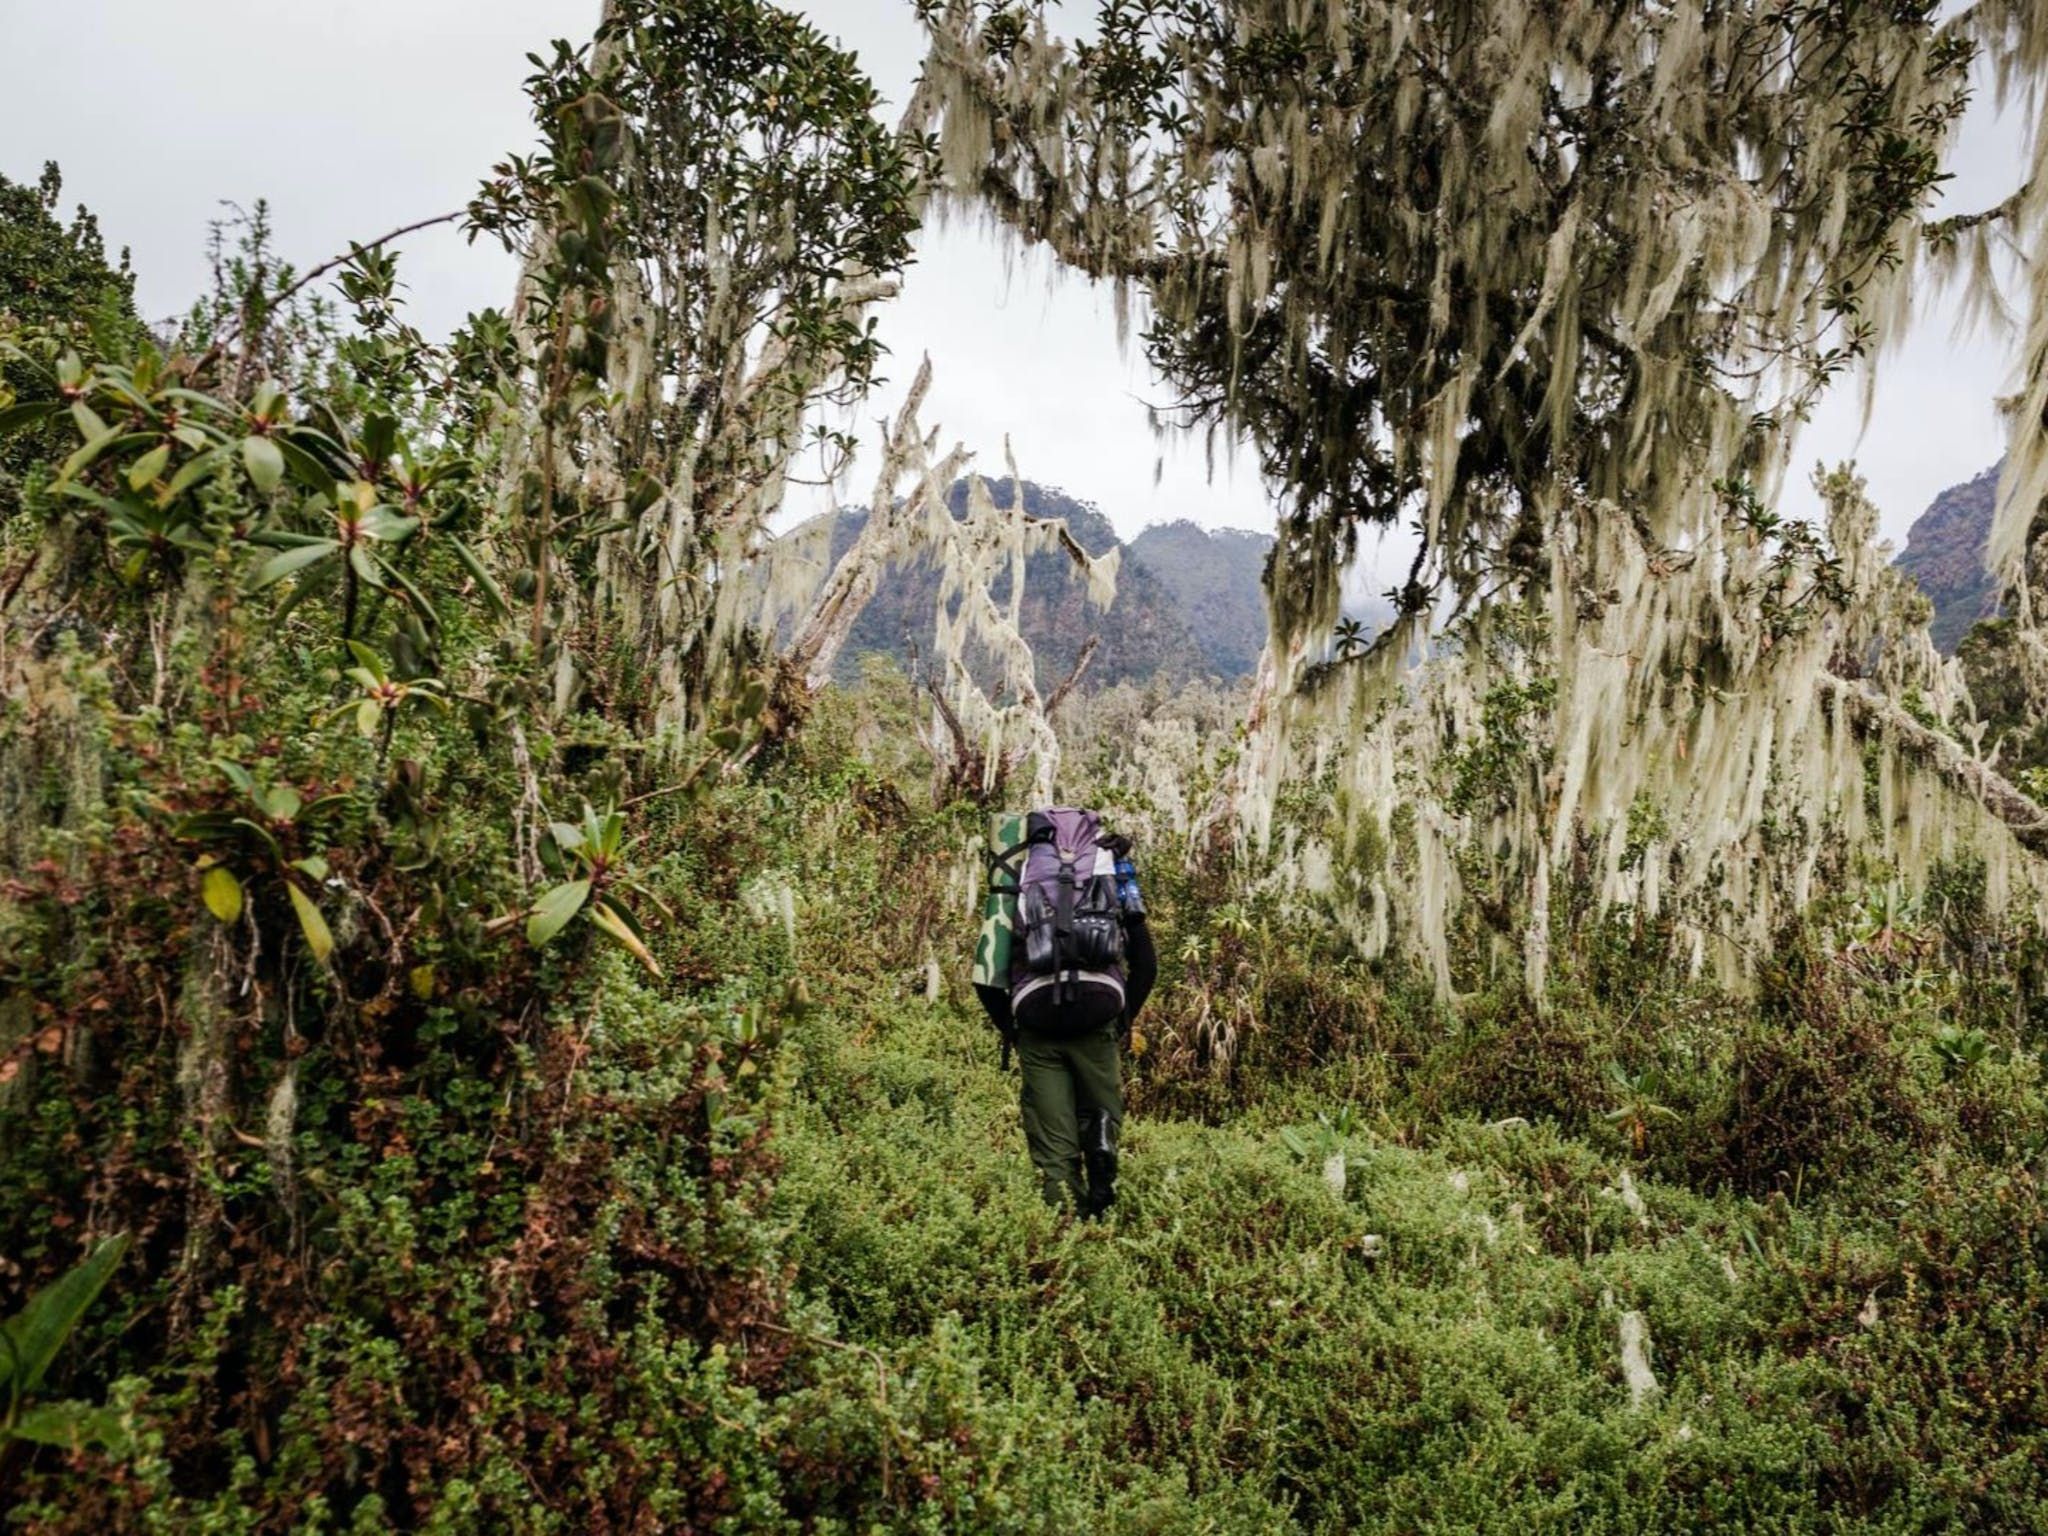 A hiker walks through the dense forest of Rwenzori, Uganda - from a clearing in the trees you can see the alpine upper levels of the range.